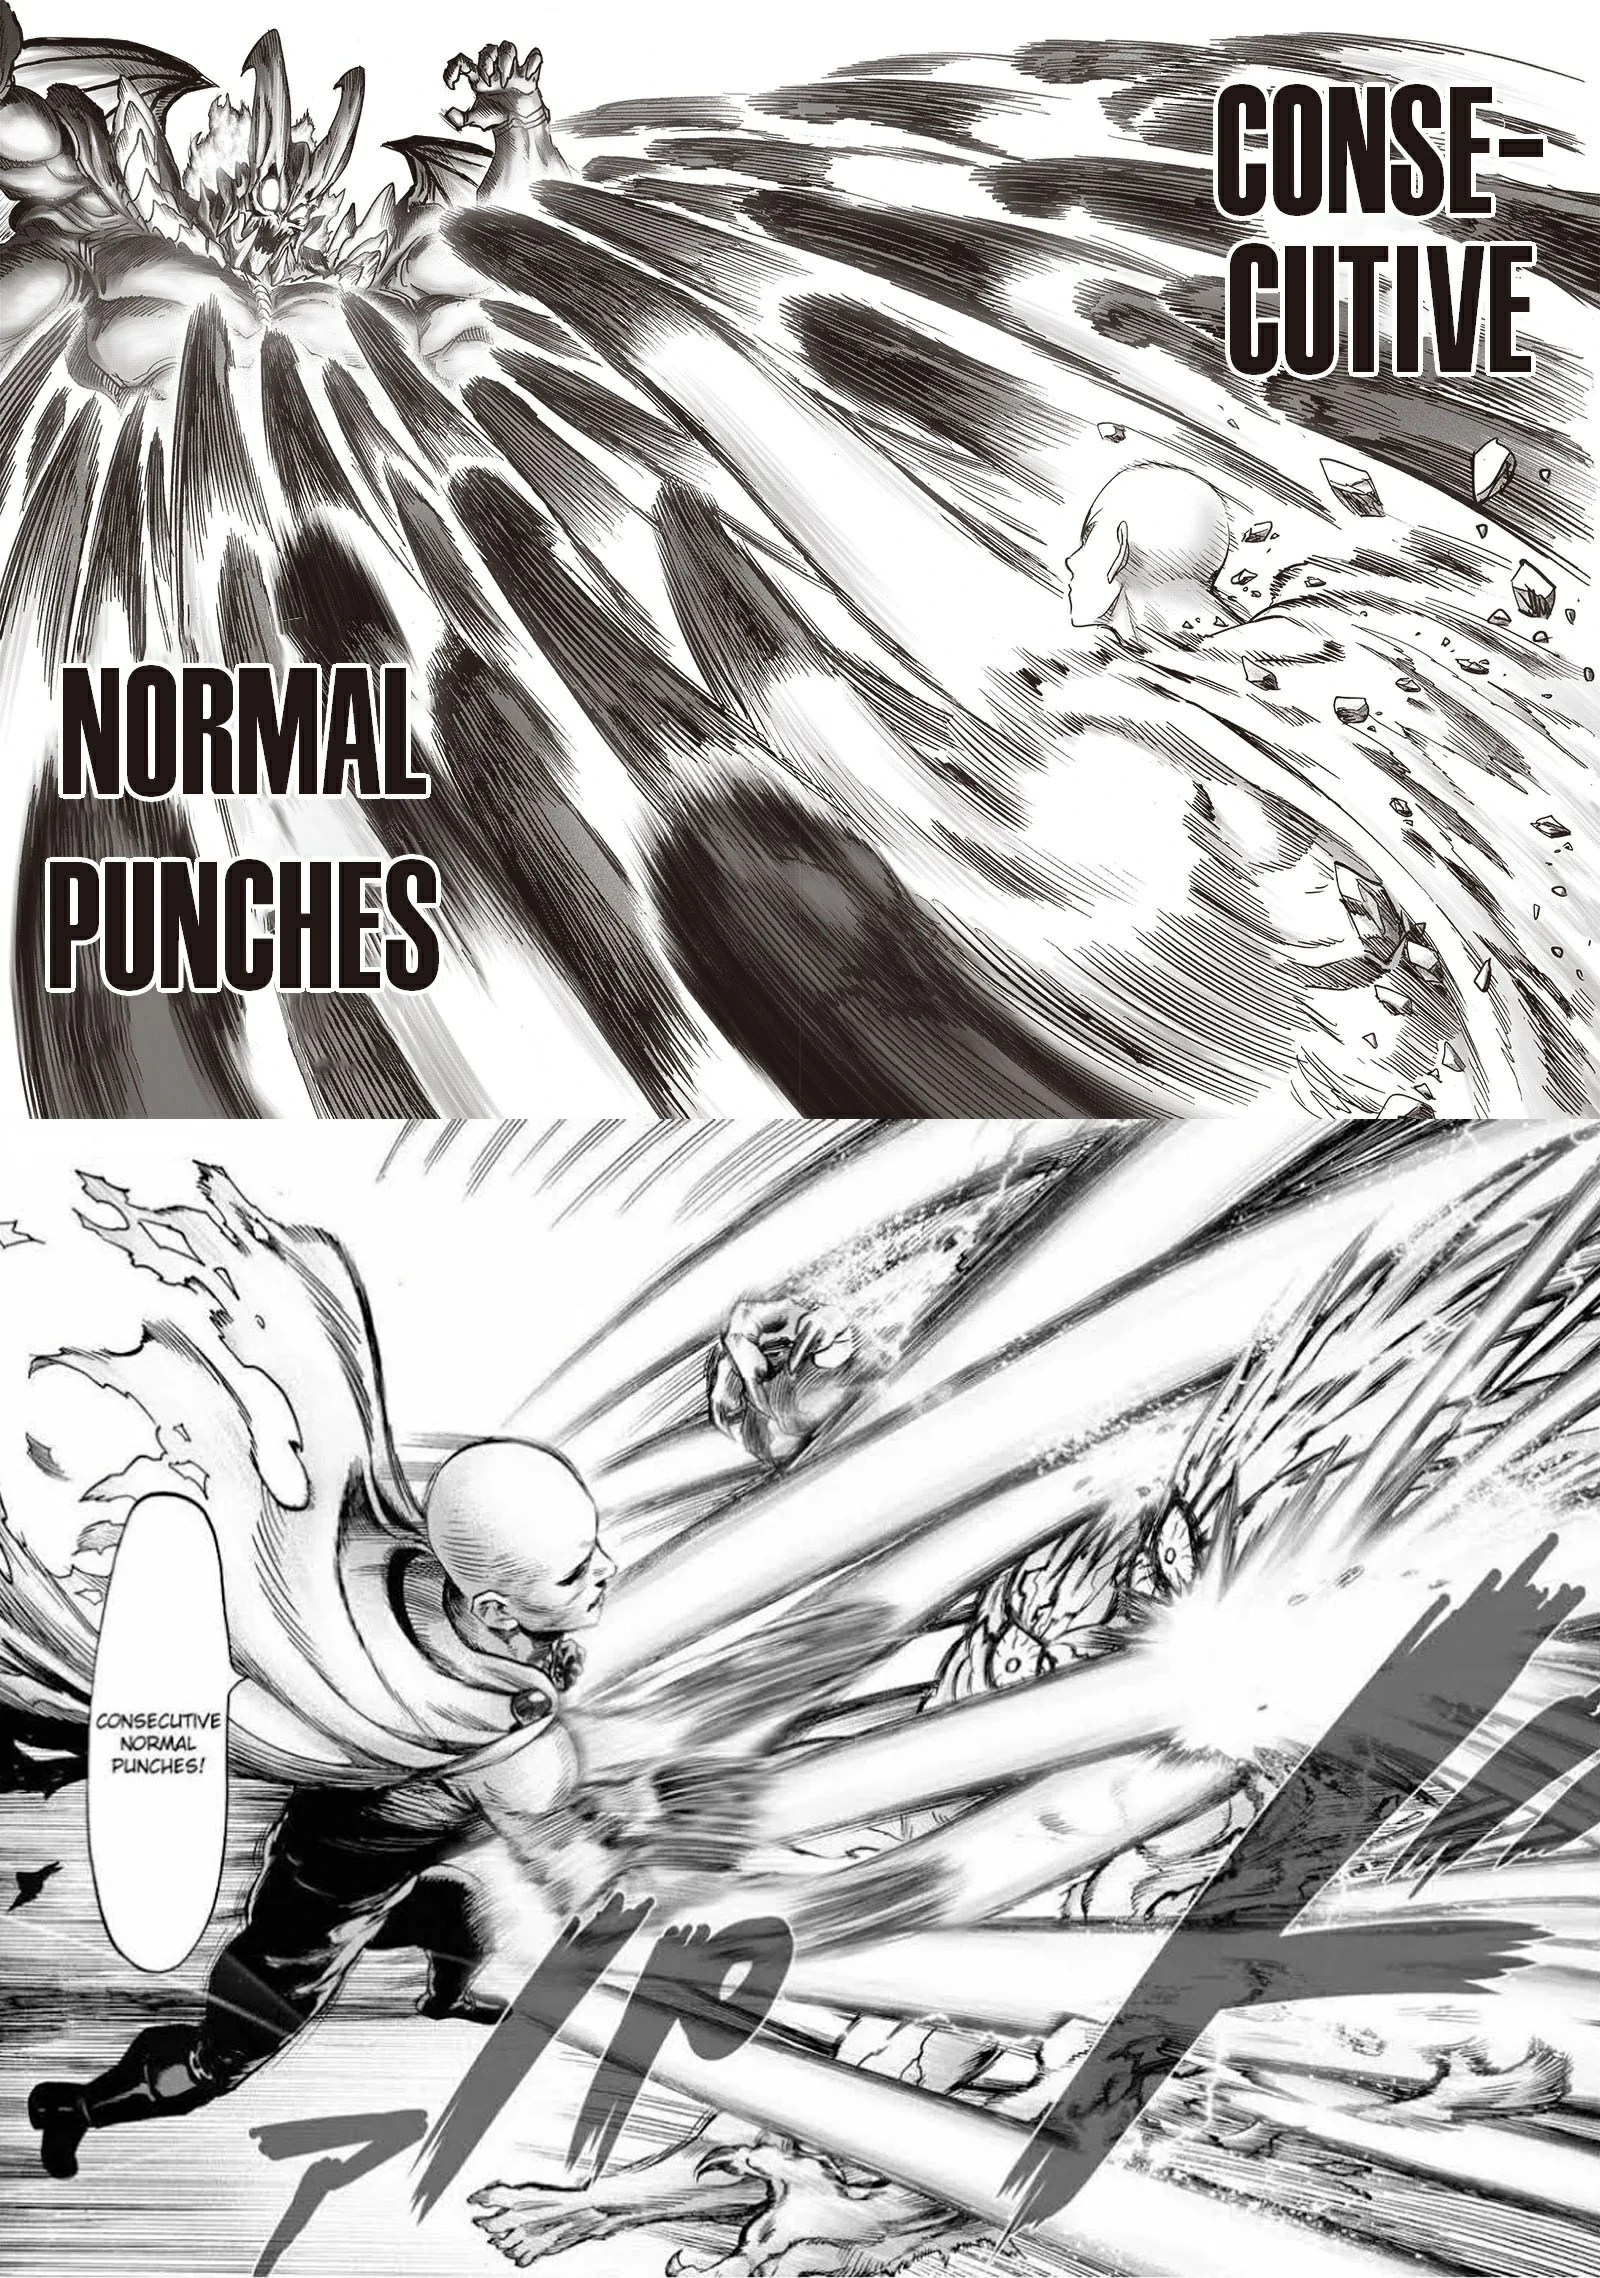 Consecutive normal punches